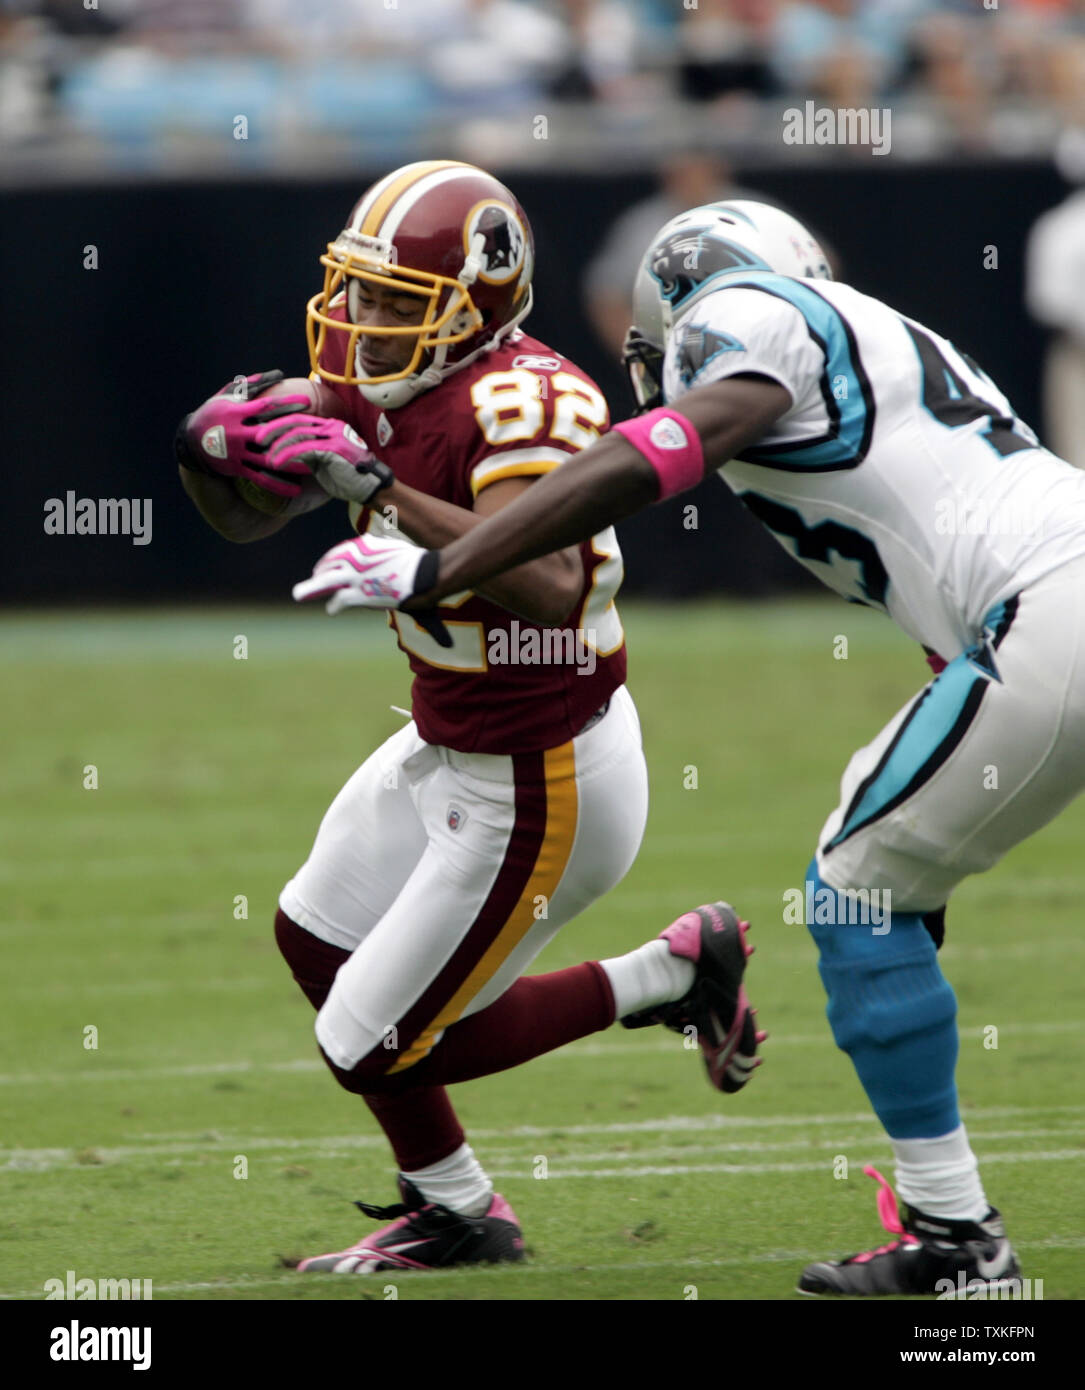 Washington Redskins wide receiver Antwaan Randle El tries to turn the corner against Carolina Panthers safety Chris Harris at Bank of America Stadium in Charlotte, North Carolina on October 11, 2009.   UPI/Nell Redmond . Stock Photo